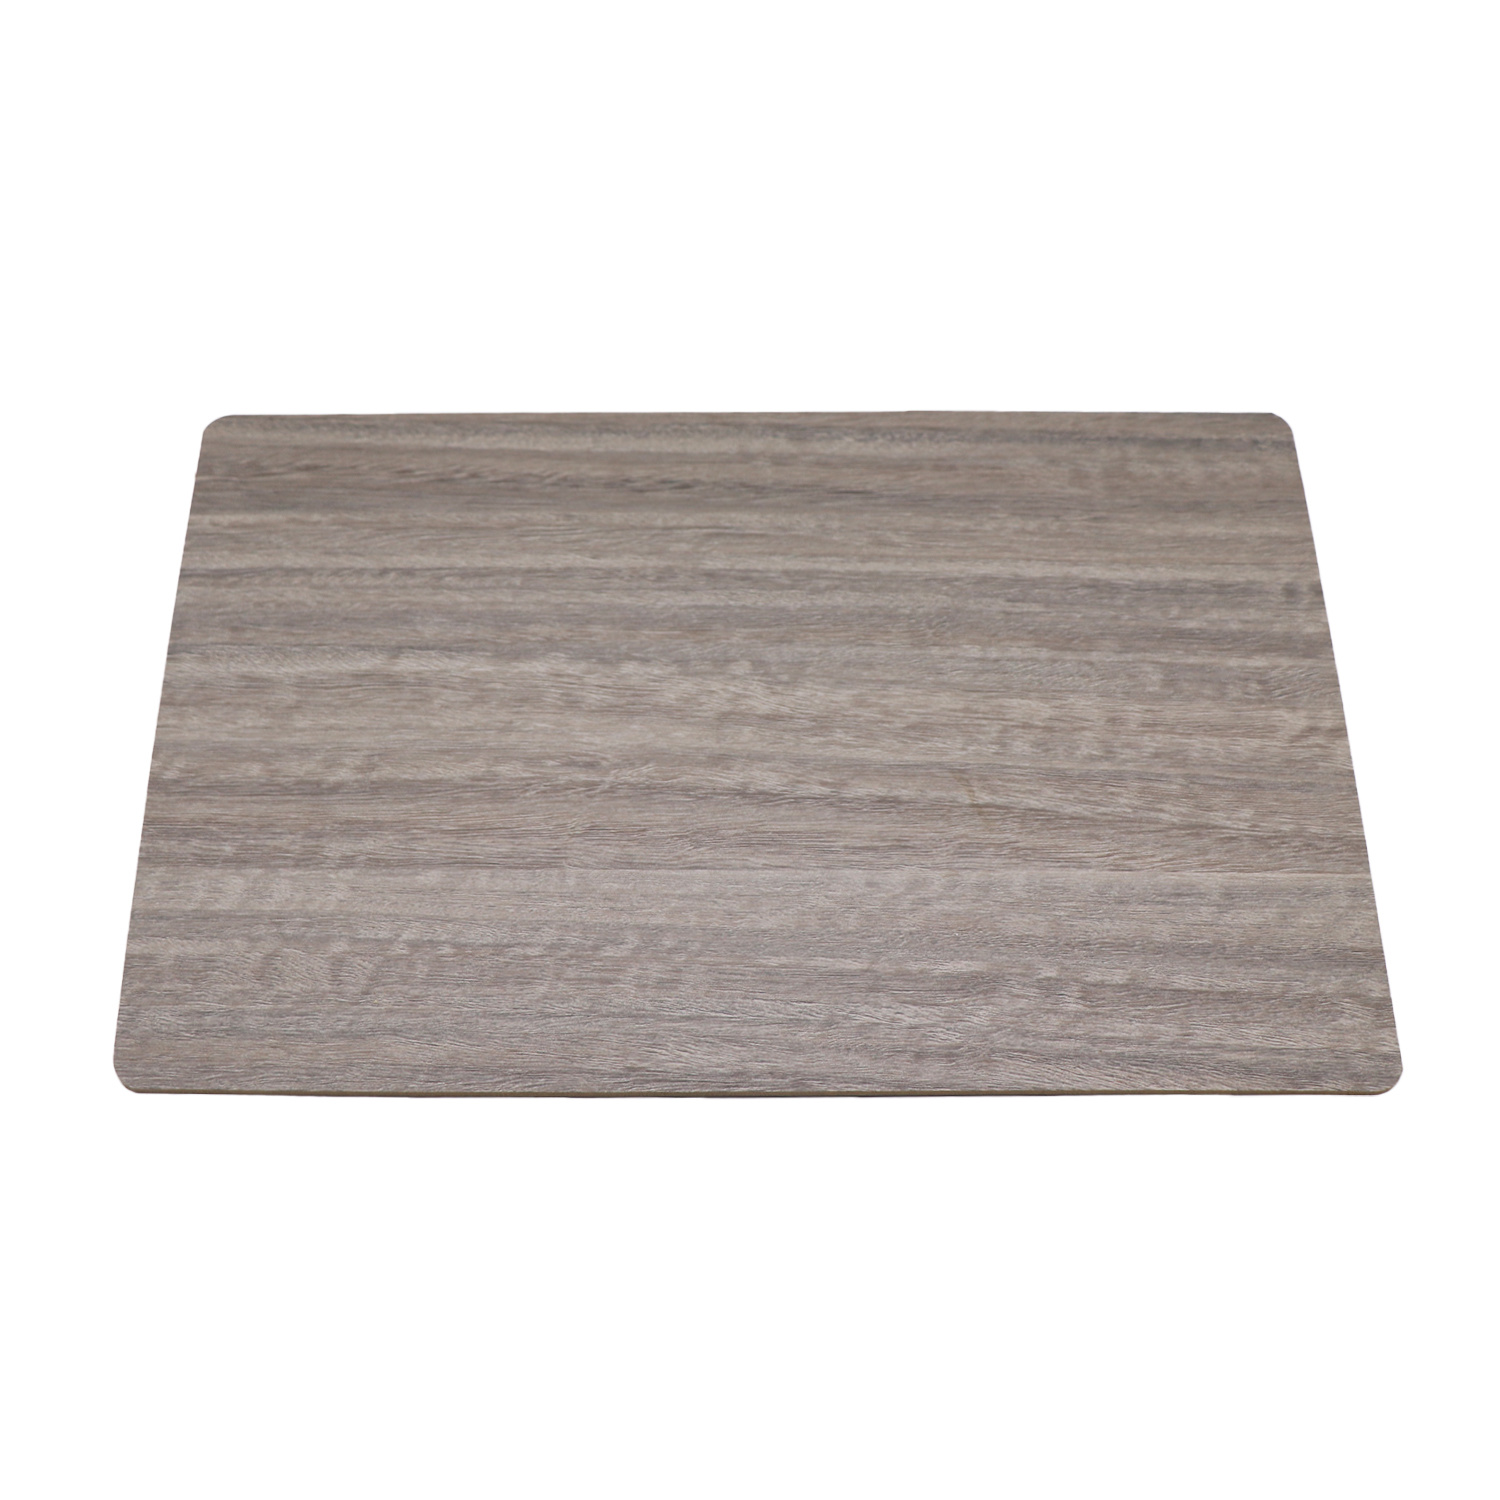 Melamine Particle Board/Chip Board for Decorative or Furniture